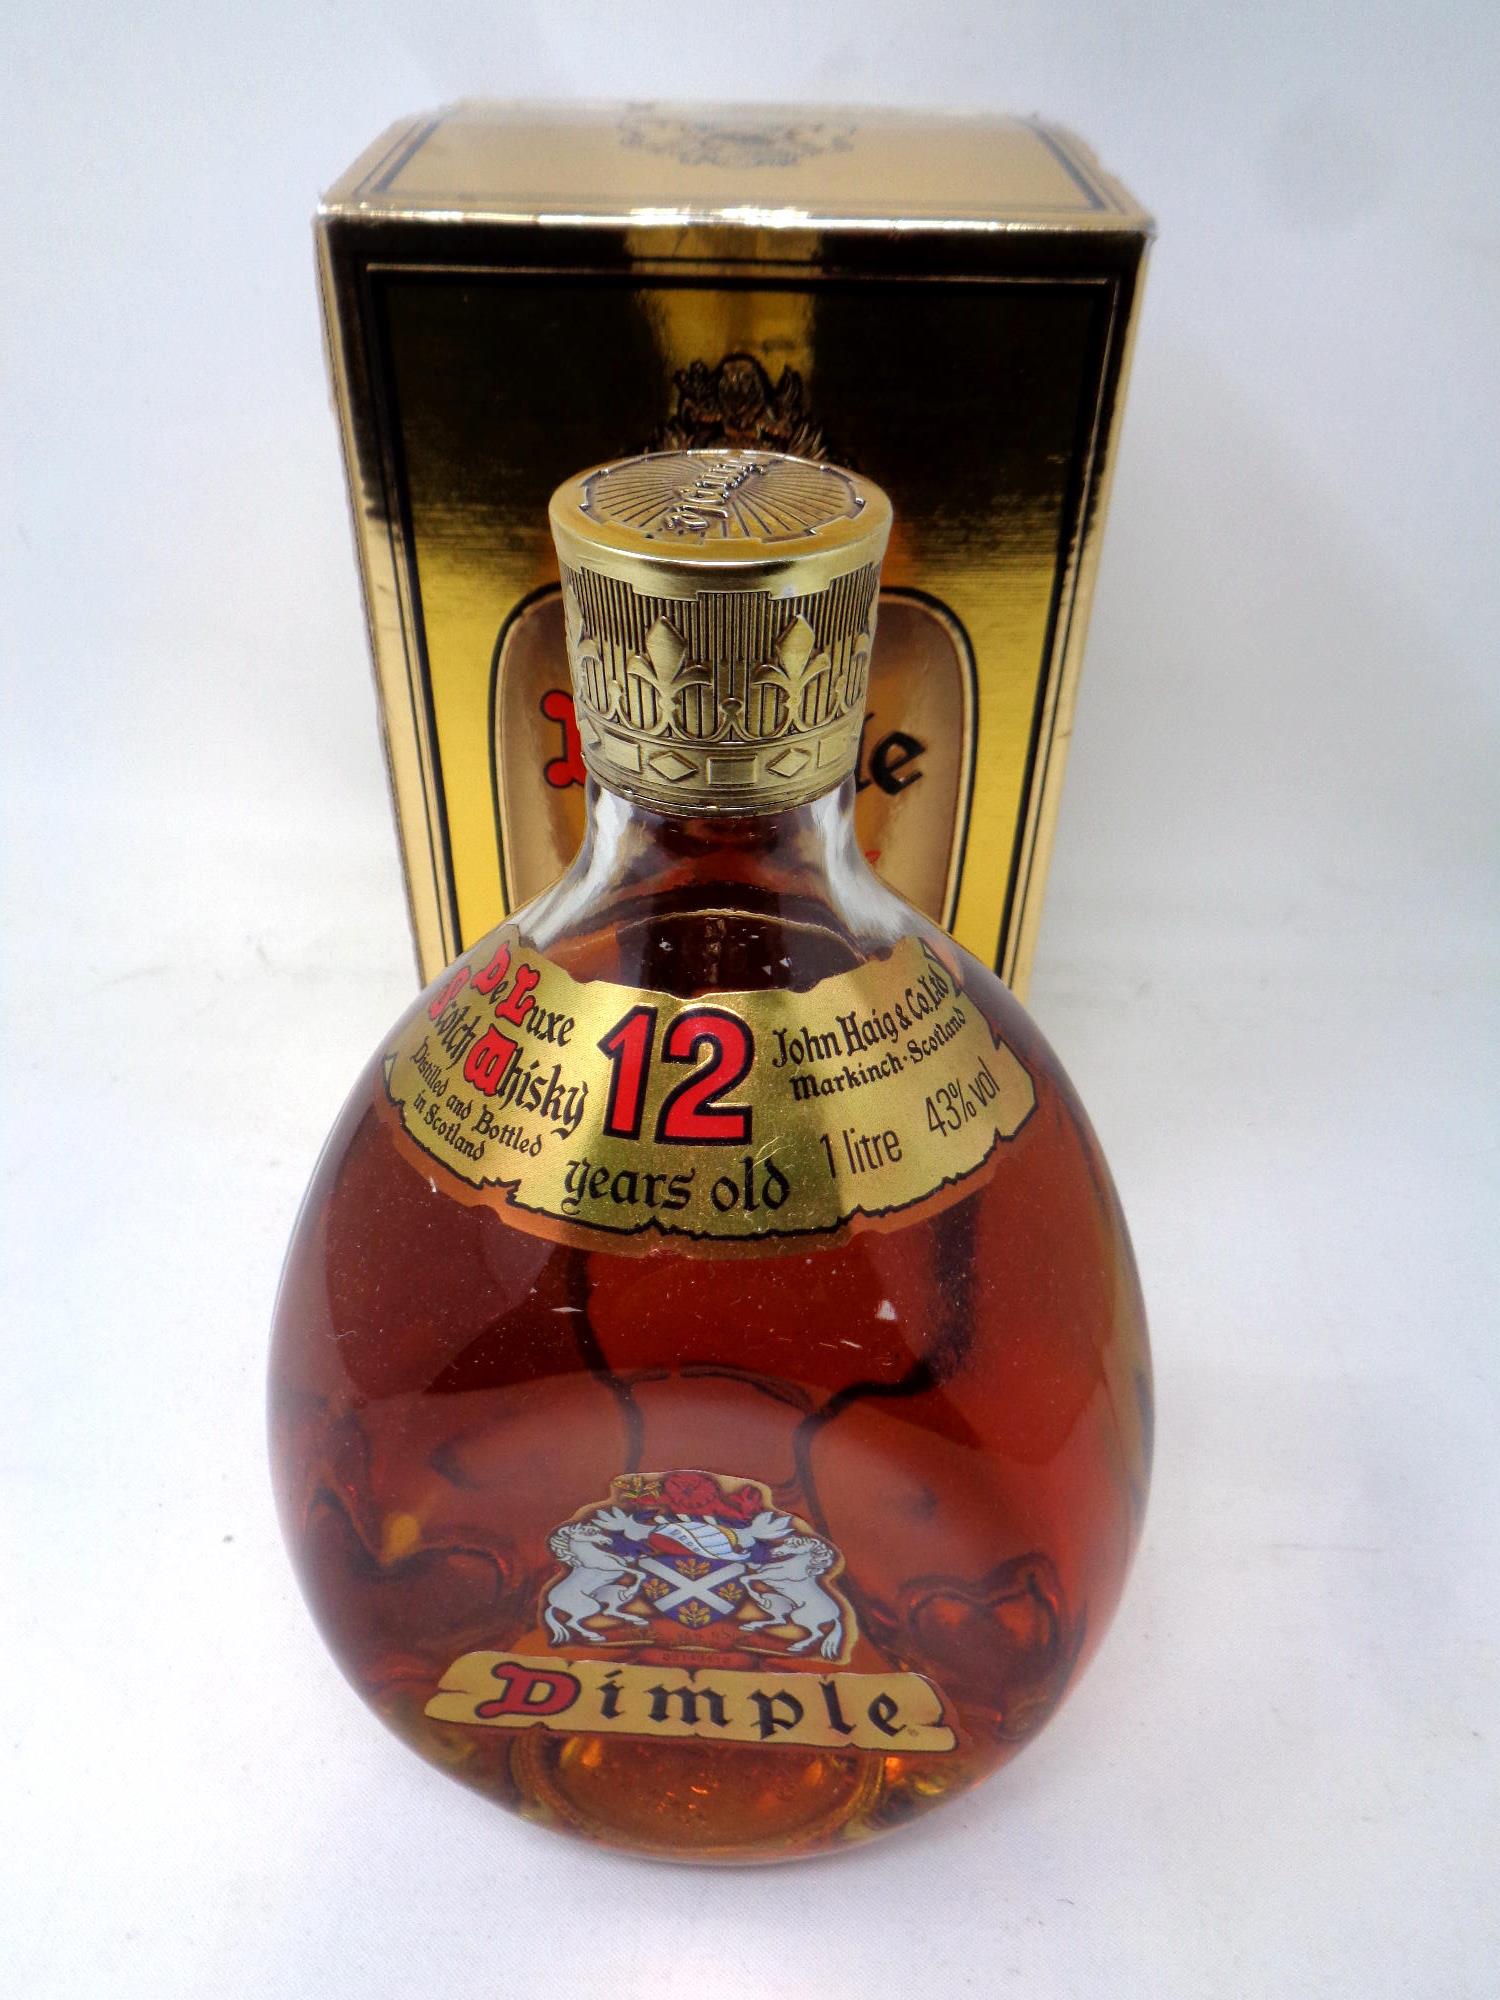 A 1 litre bottle of Dimple De Luxe Scotch whisky 12 years old in presentation box